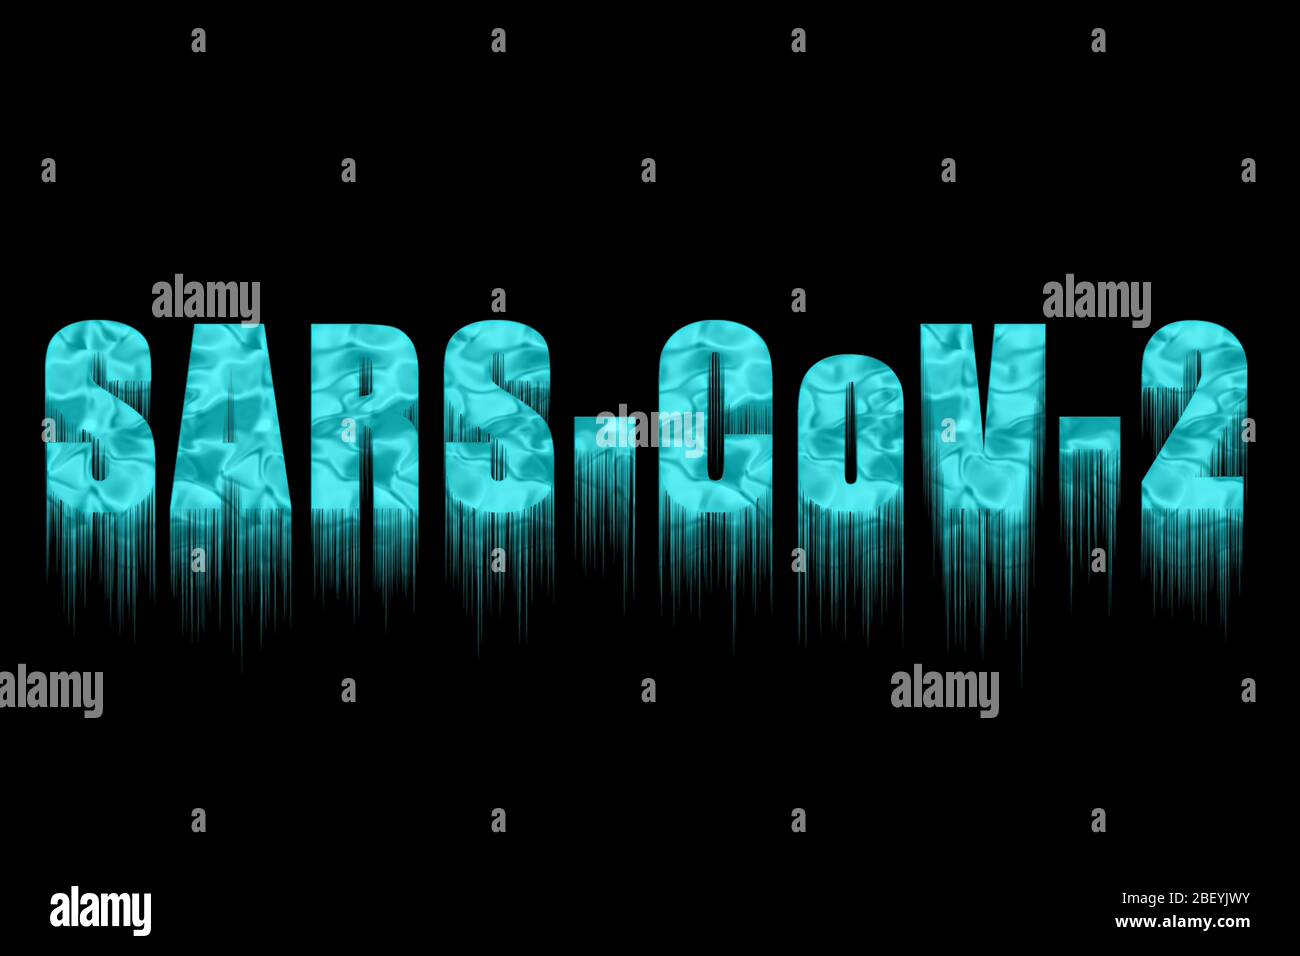 Concept SARS-CoV-2 on the black background. Decorative frozen text - SARS-CoV-2 - with icicles. Stock Photo